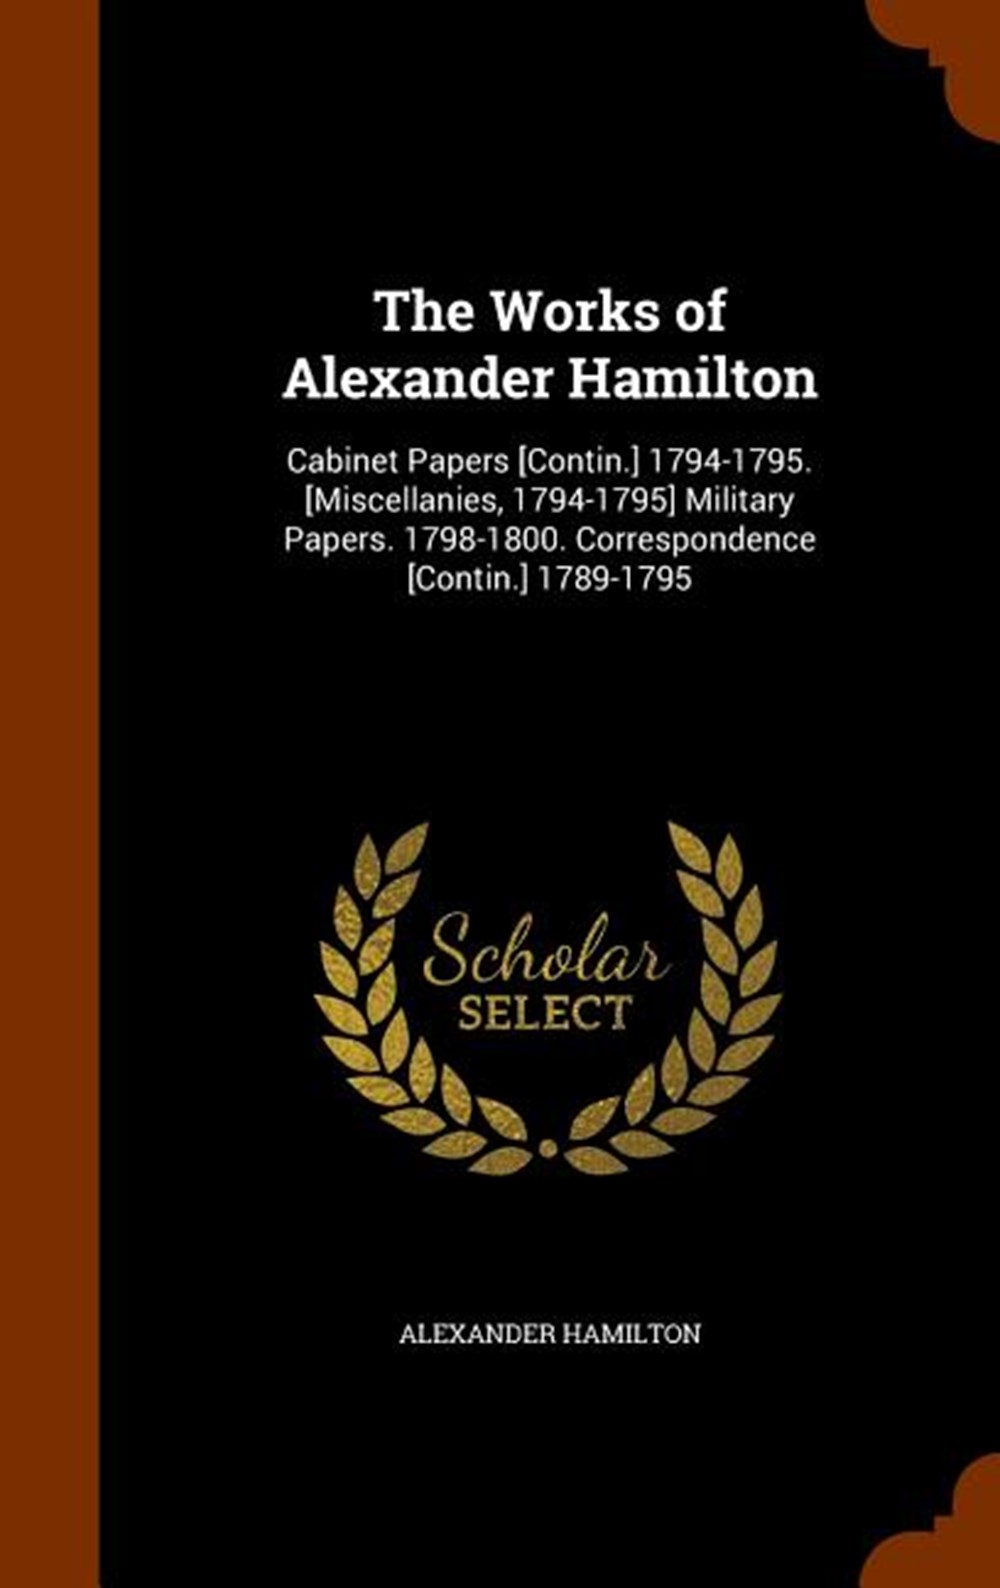 Works of Alexander Hamilton: Cabinet Papers [Contin.] 1794-1795. [Miscellanies, 1794-1795] Military 